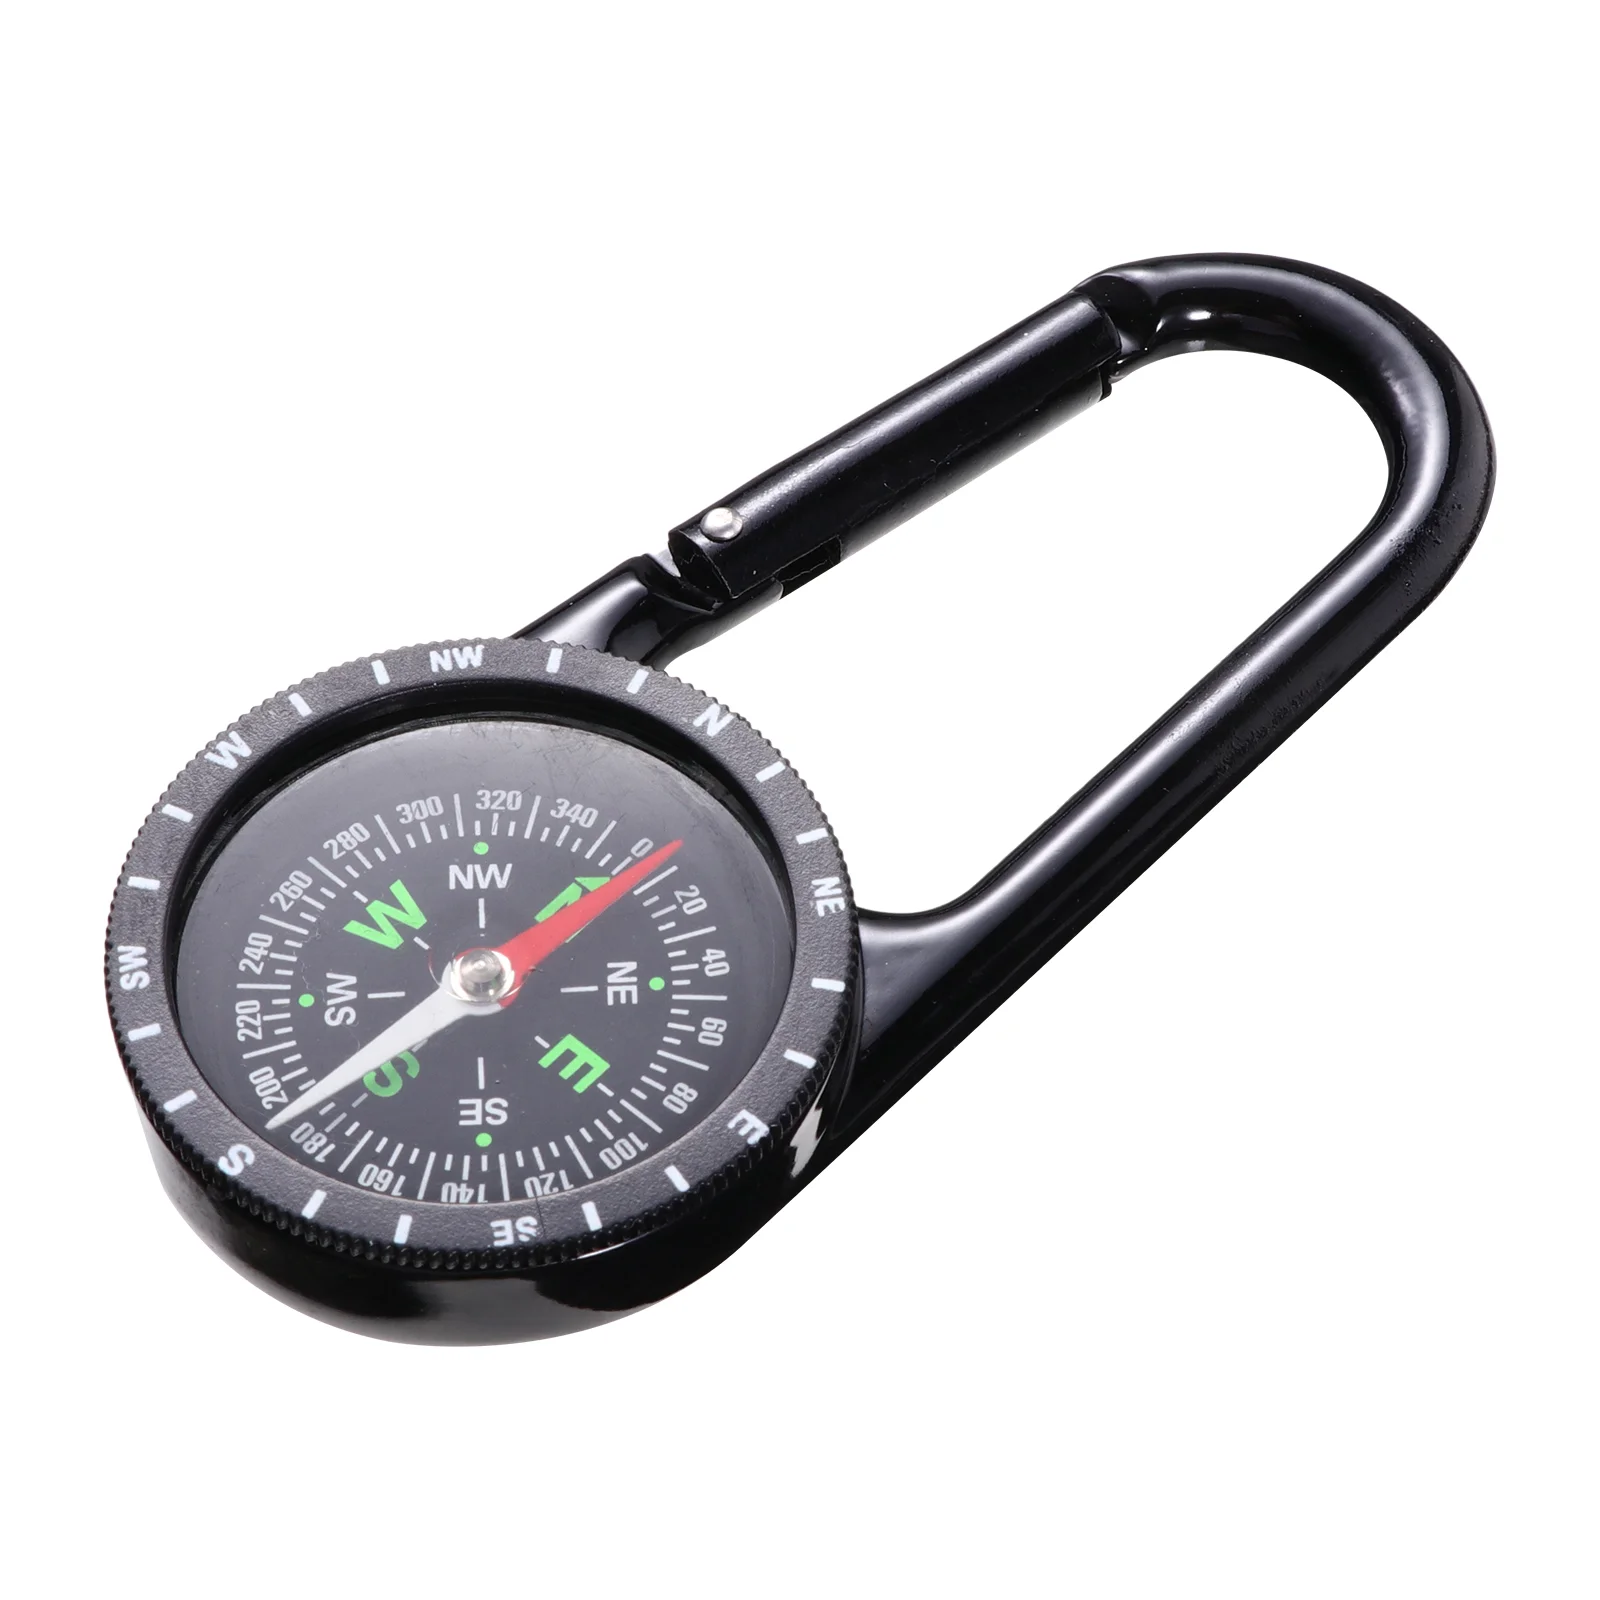 

Compass Carabiner Camping Clip Clips Compasses Keychain Multifunctional Outdoor Mini Hiking Backpacking Metal Militarysurvival